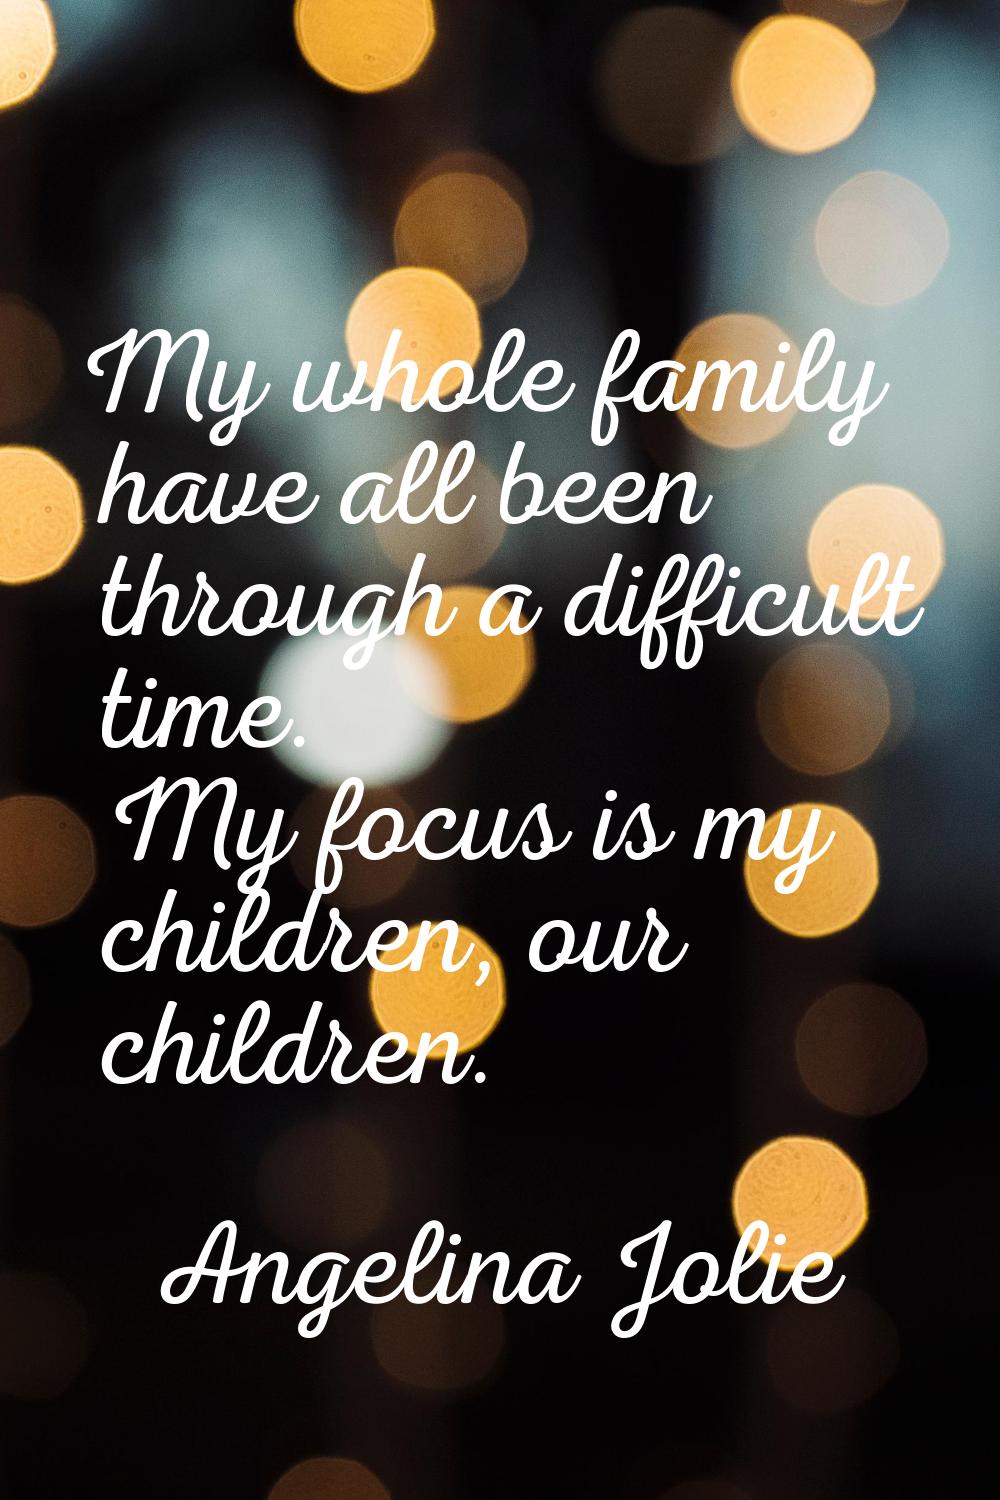 My whole family have all been through a difficult time. My focus is my children, our children.